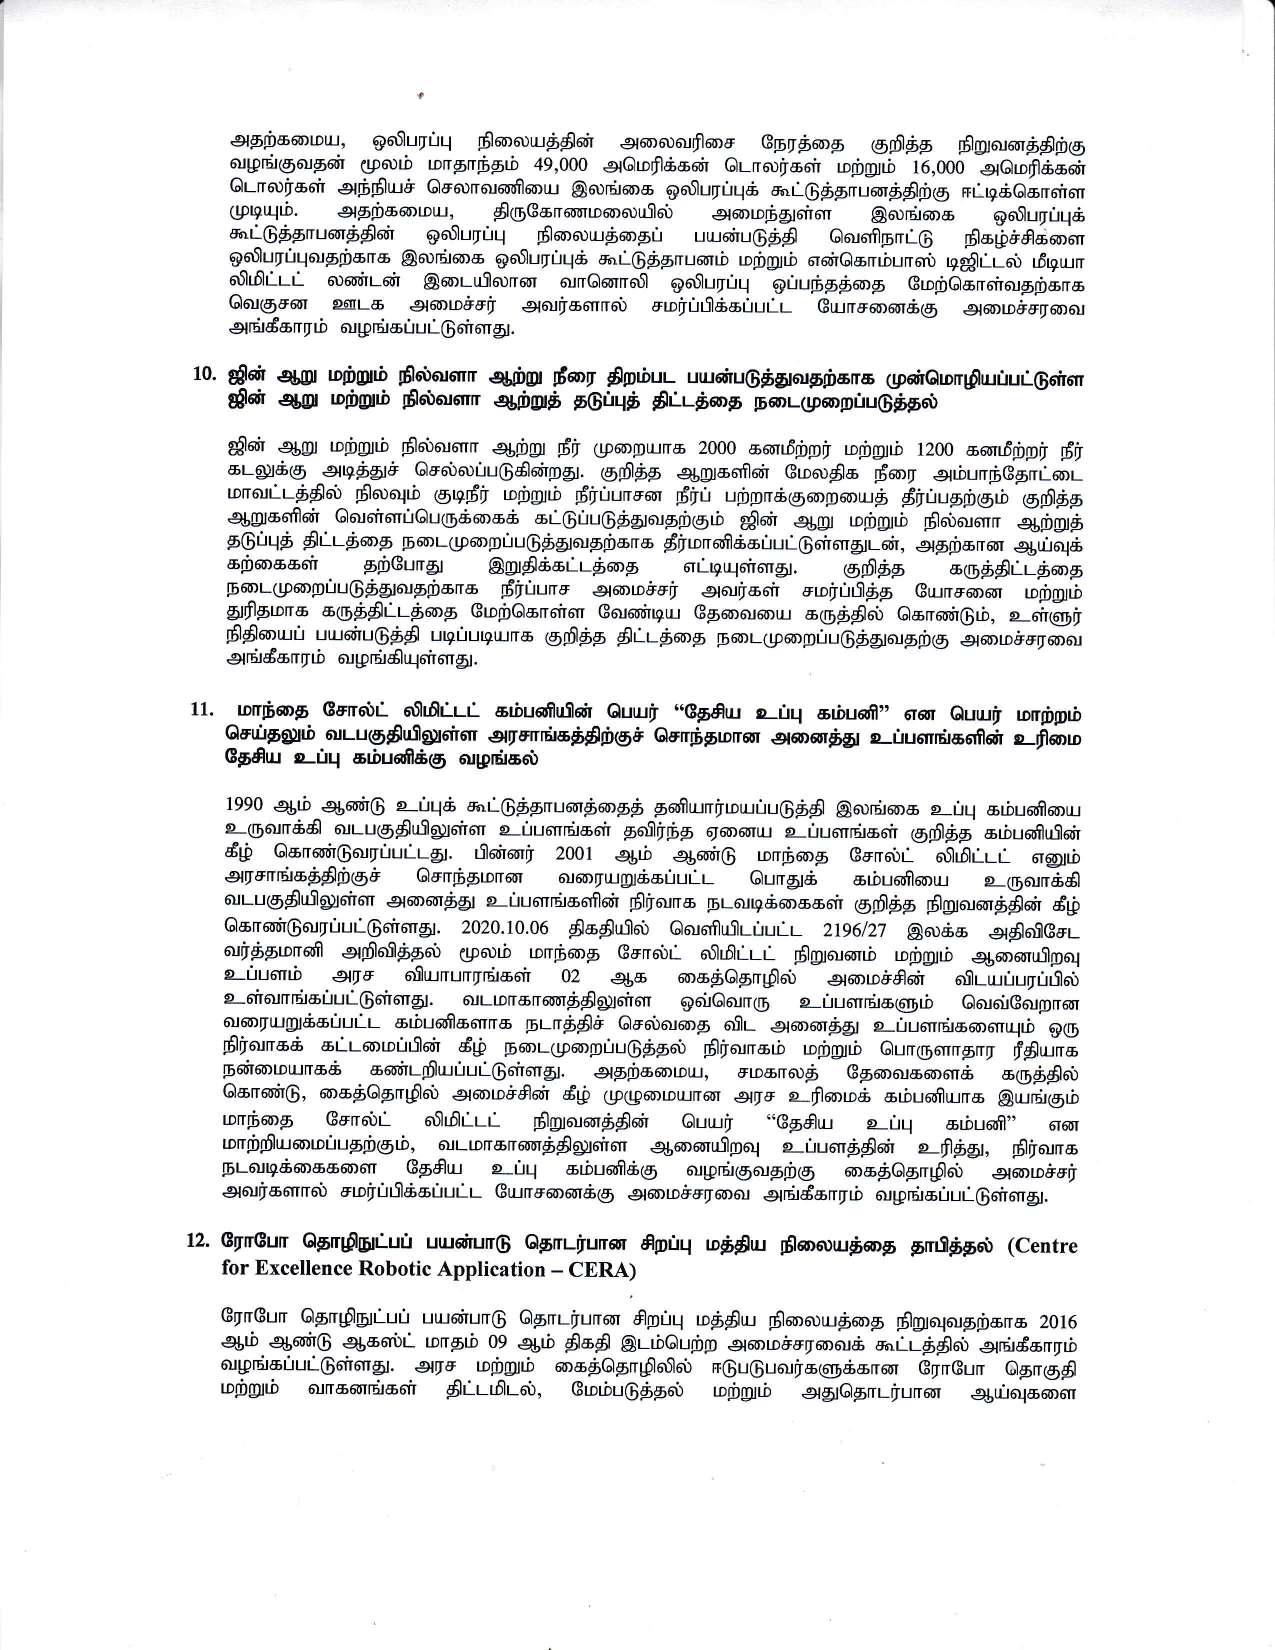 Cabinet Desion on 16.11.2020 Tamil page 004